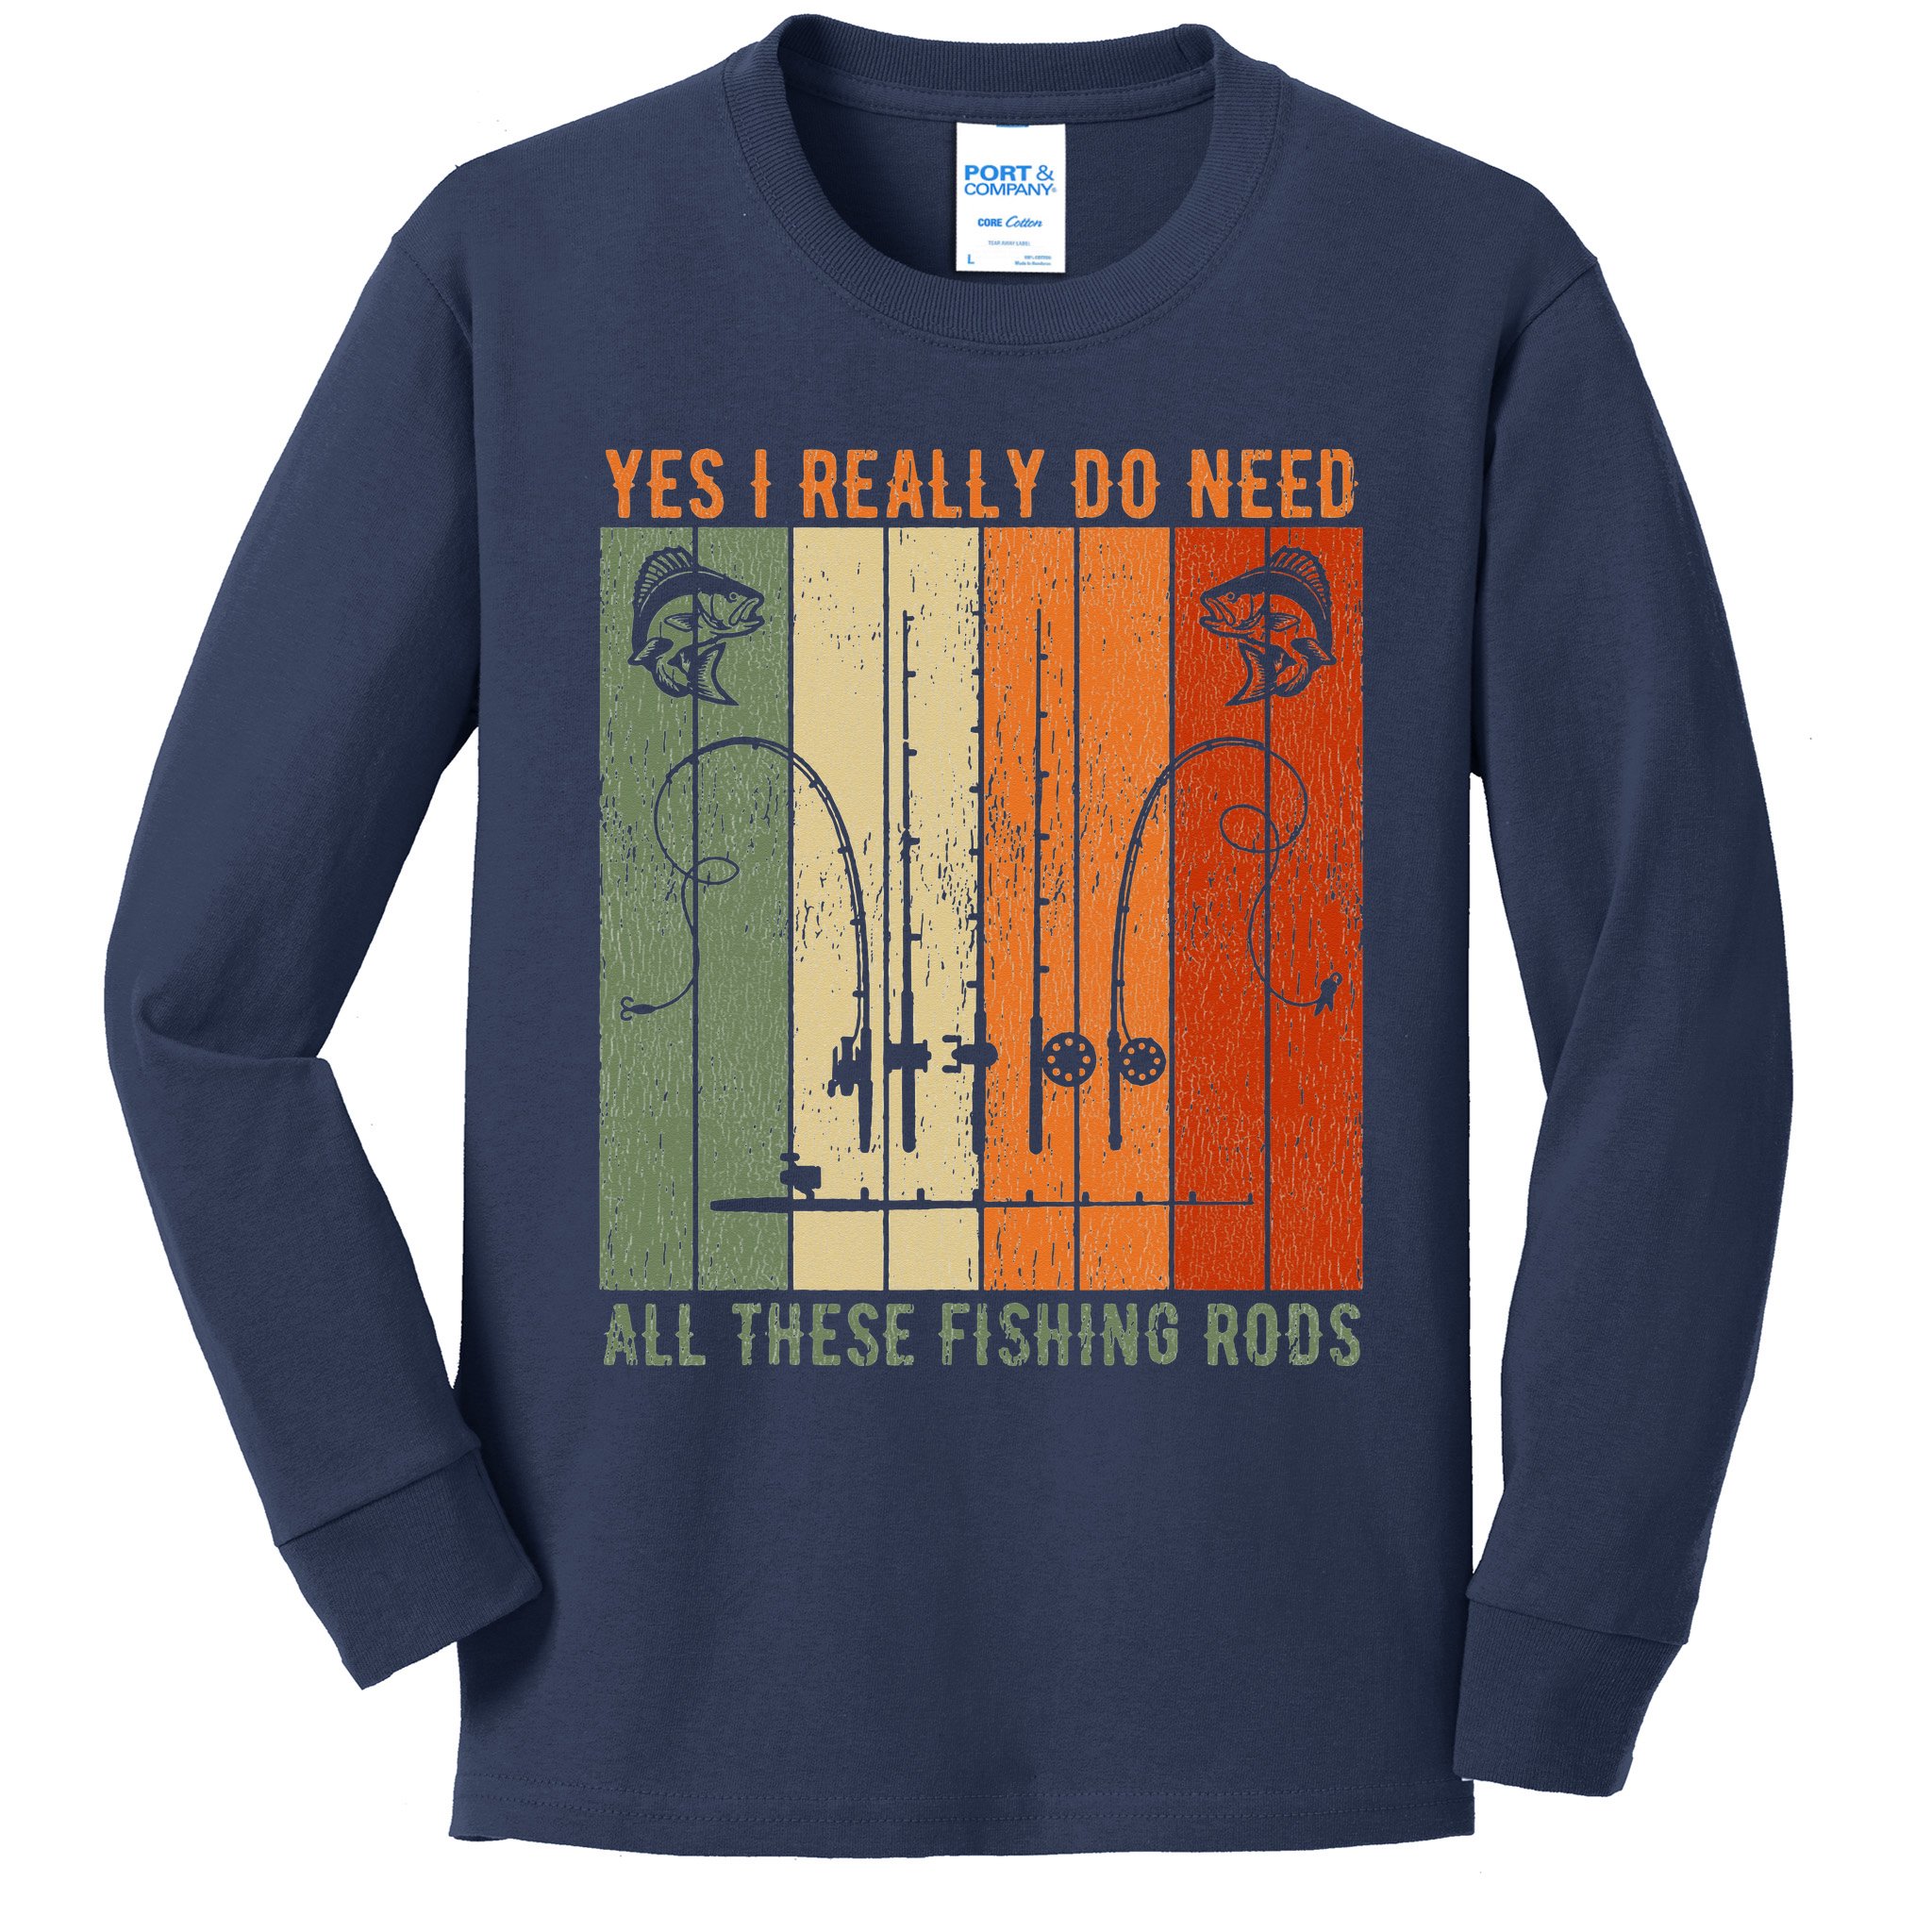 Yes I Really Do Need All These Fishing Rods Kids Long Sleeve Shirt